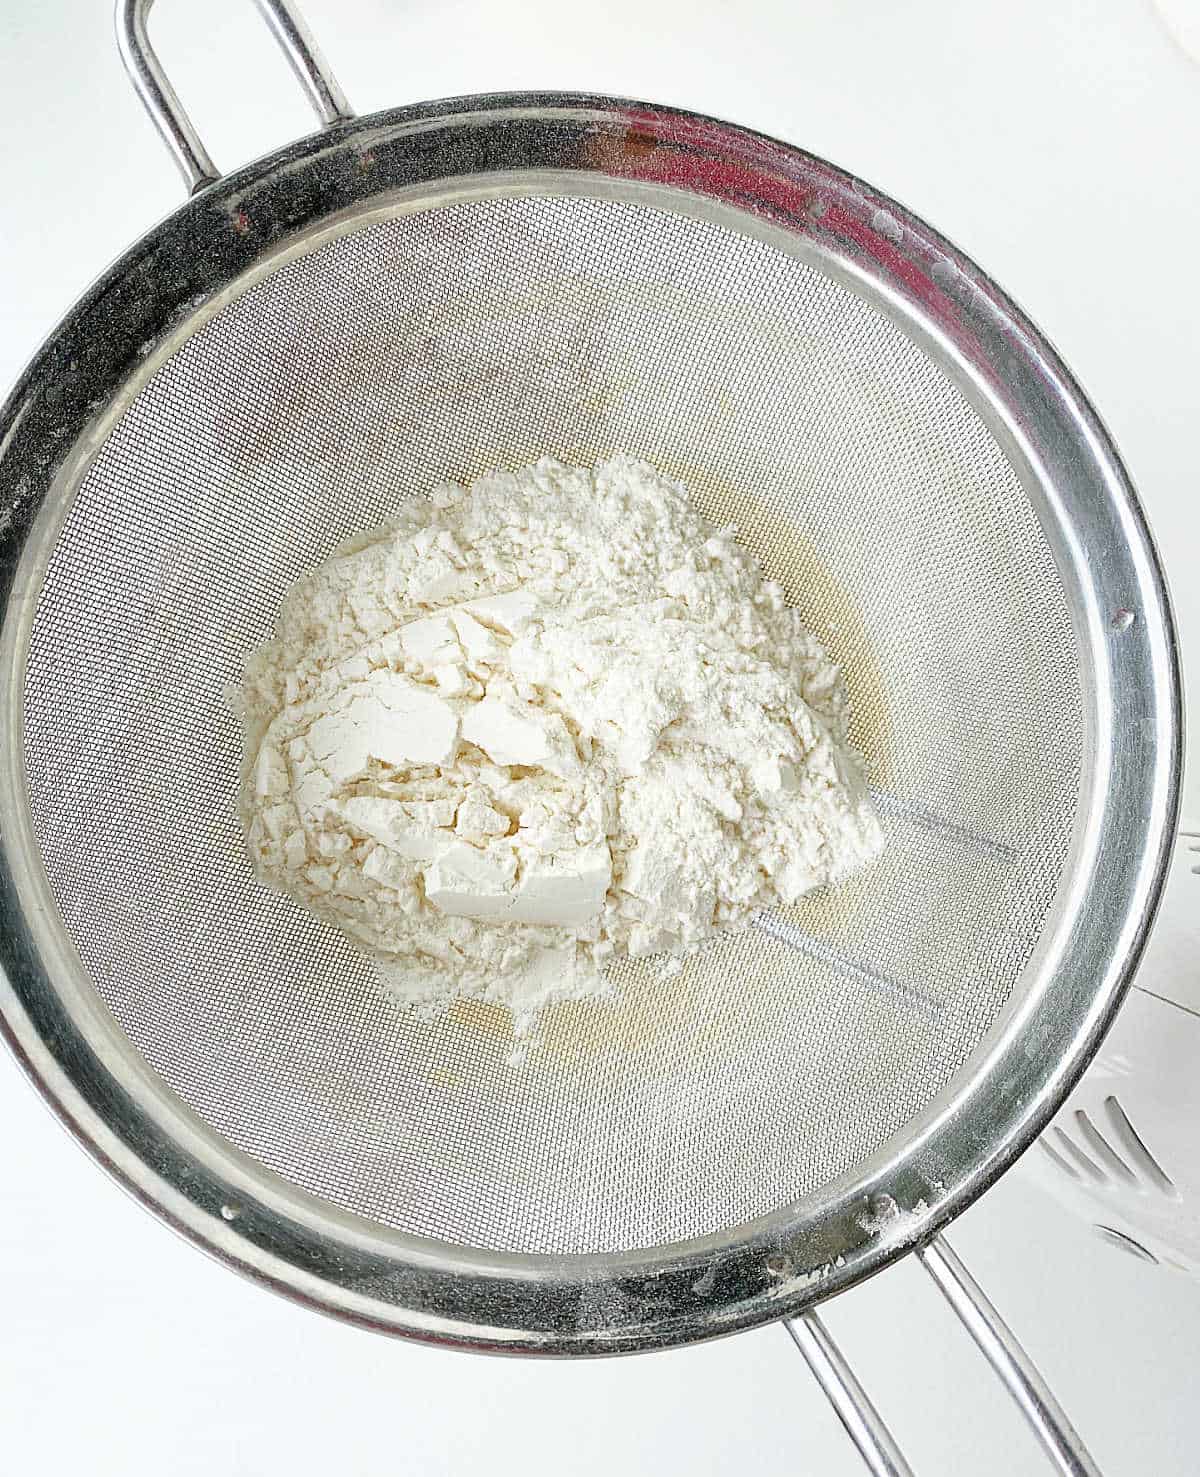 Sifter with flour on white surface